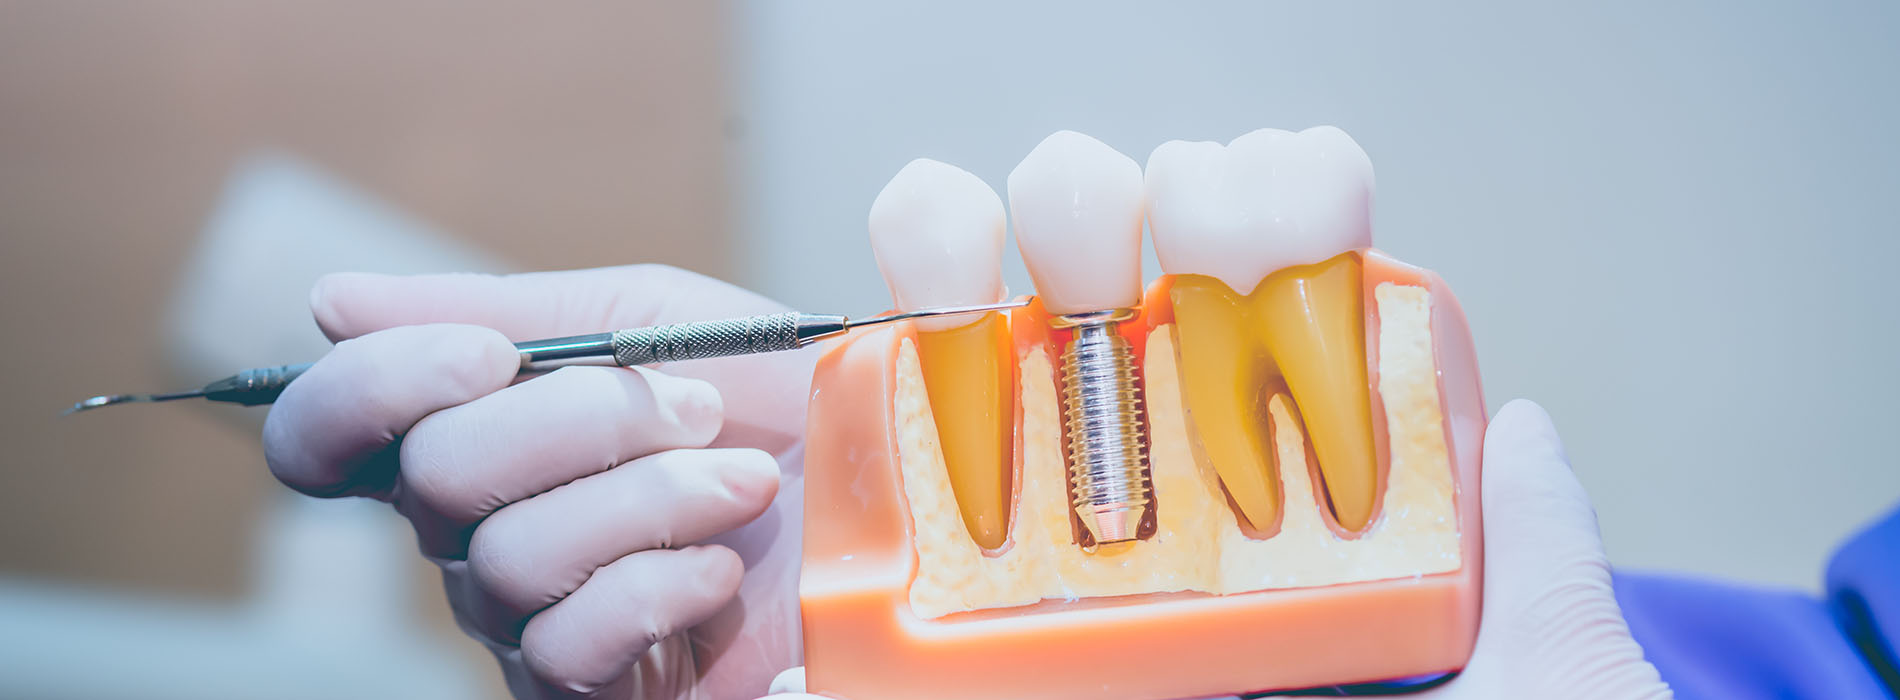 Advanced Dental Care | Periodontal Treatment, Implant Restorations and Digital Radiography